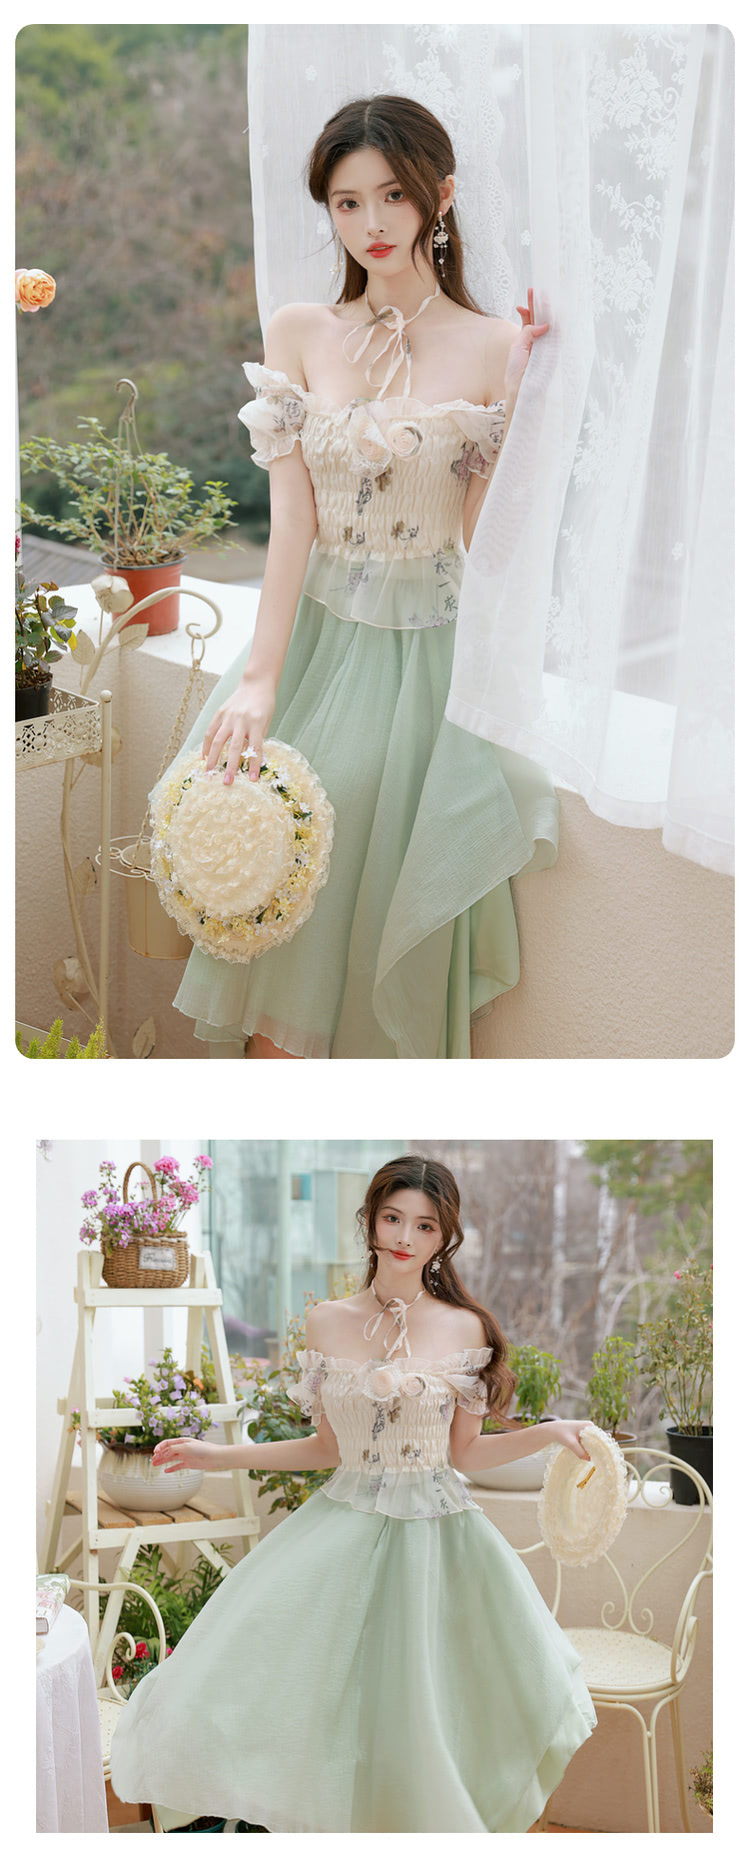 Fairy-Off-Shoulder-Top-with-Irregular-Skirt-Casual-Summer-Outfits12.jpg